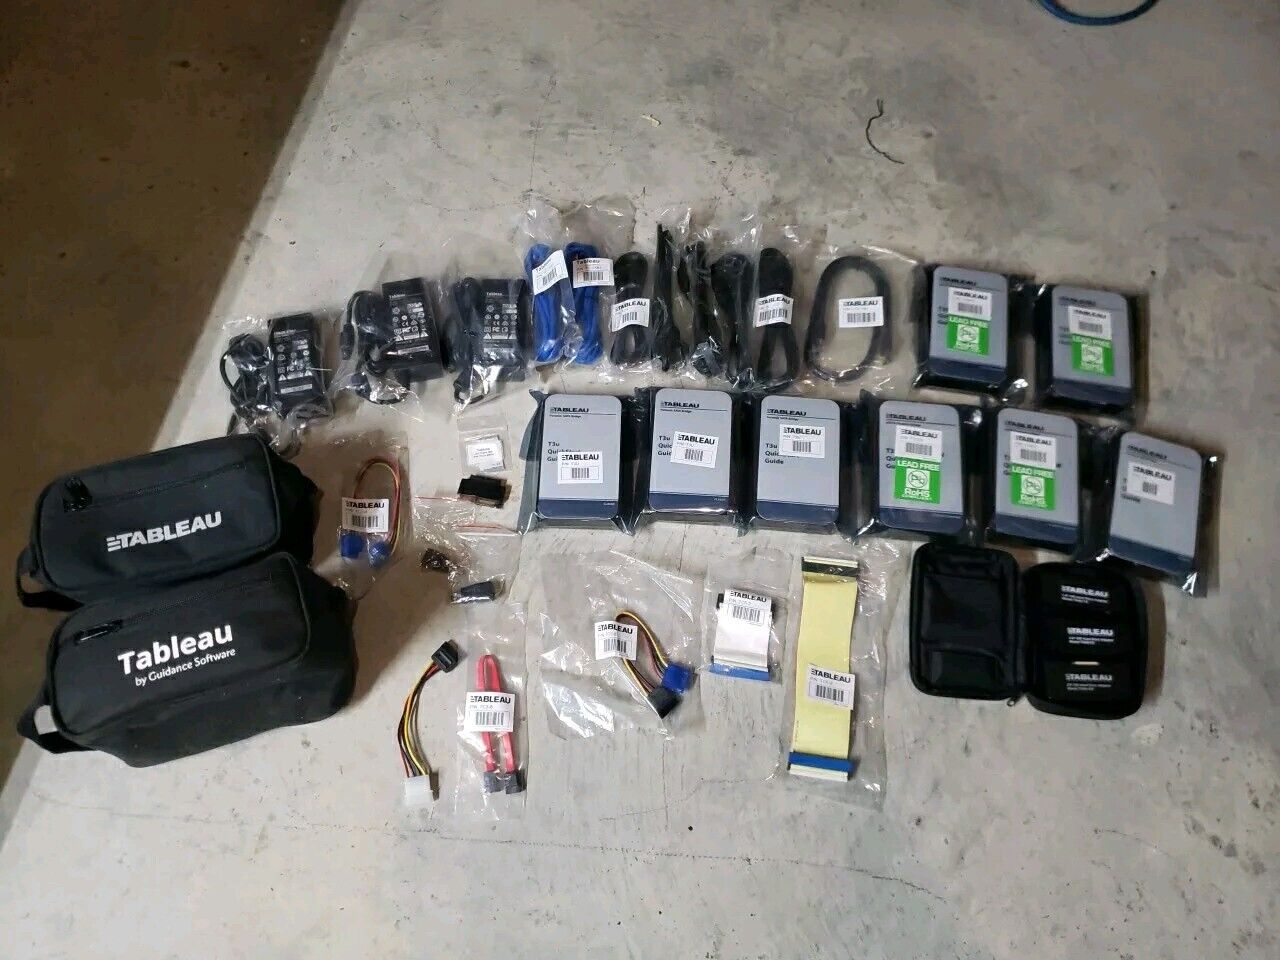  lot of tableau forensic devices units T3U, T35ES, T5 (All New) And Accessories 